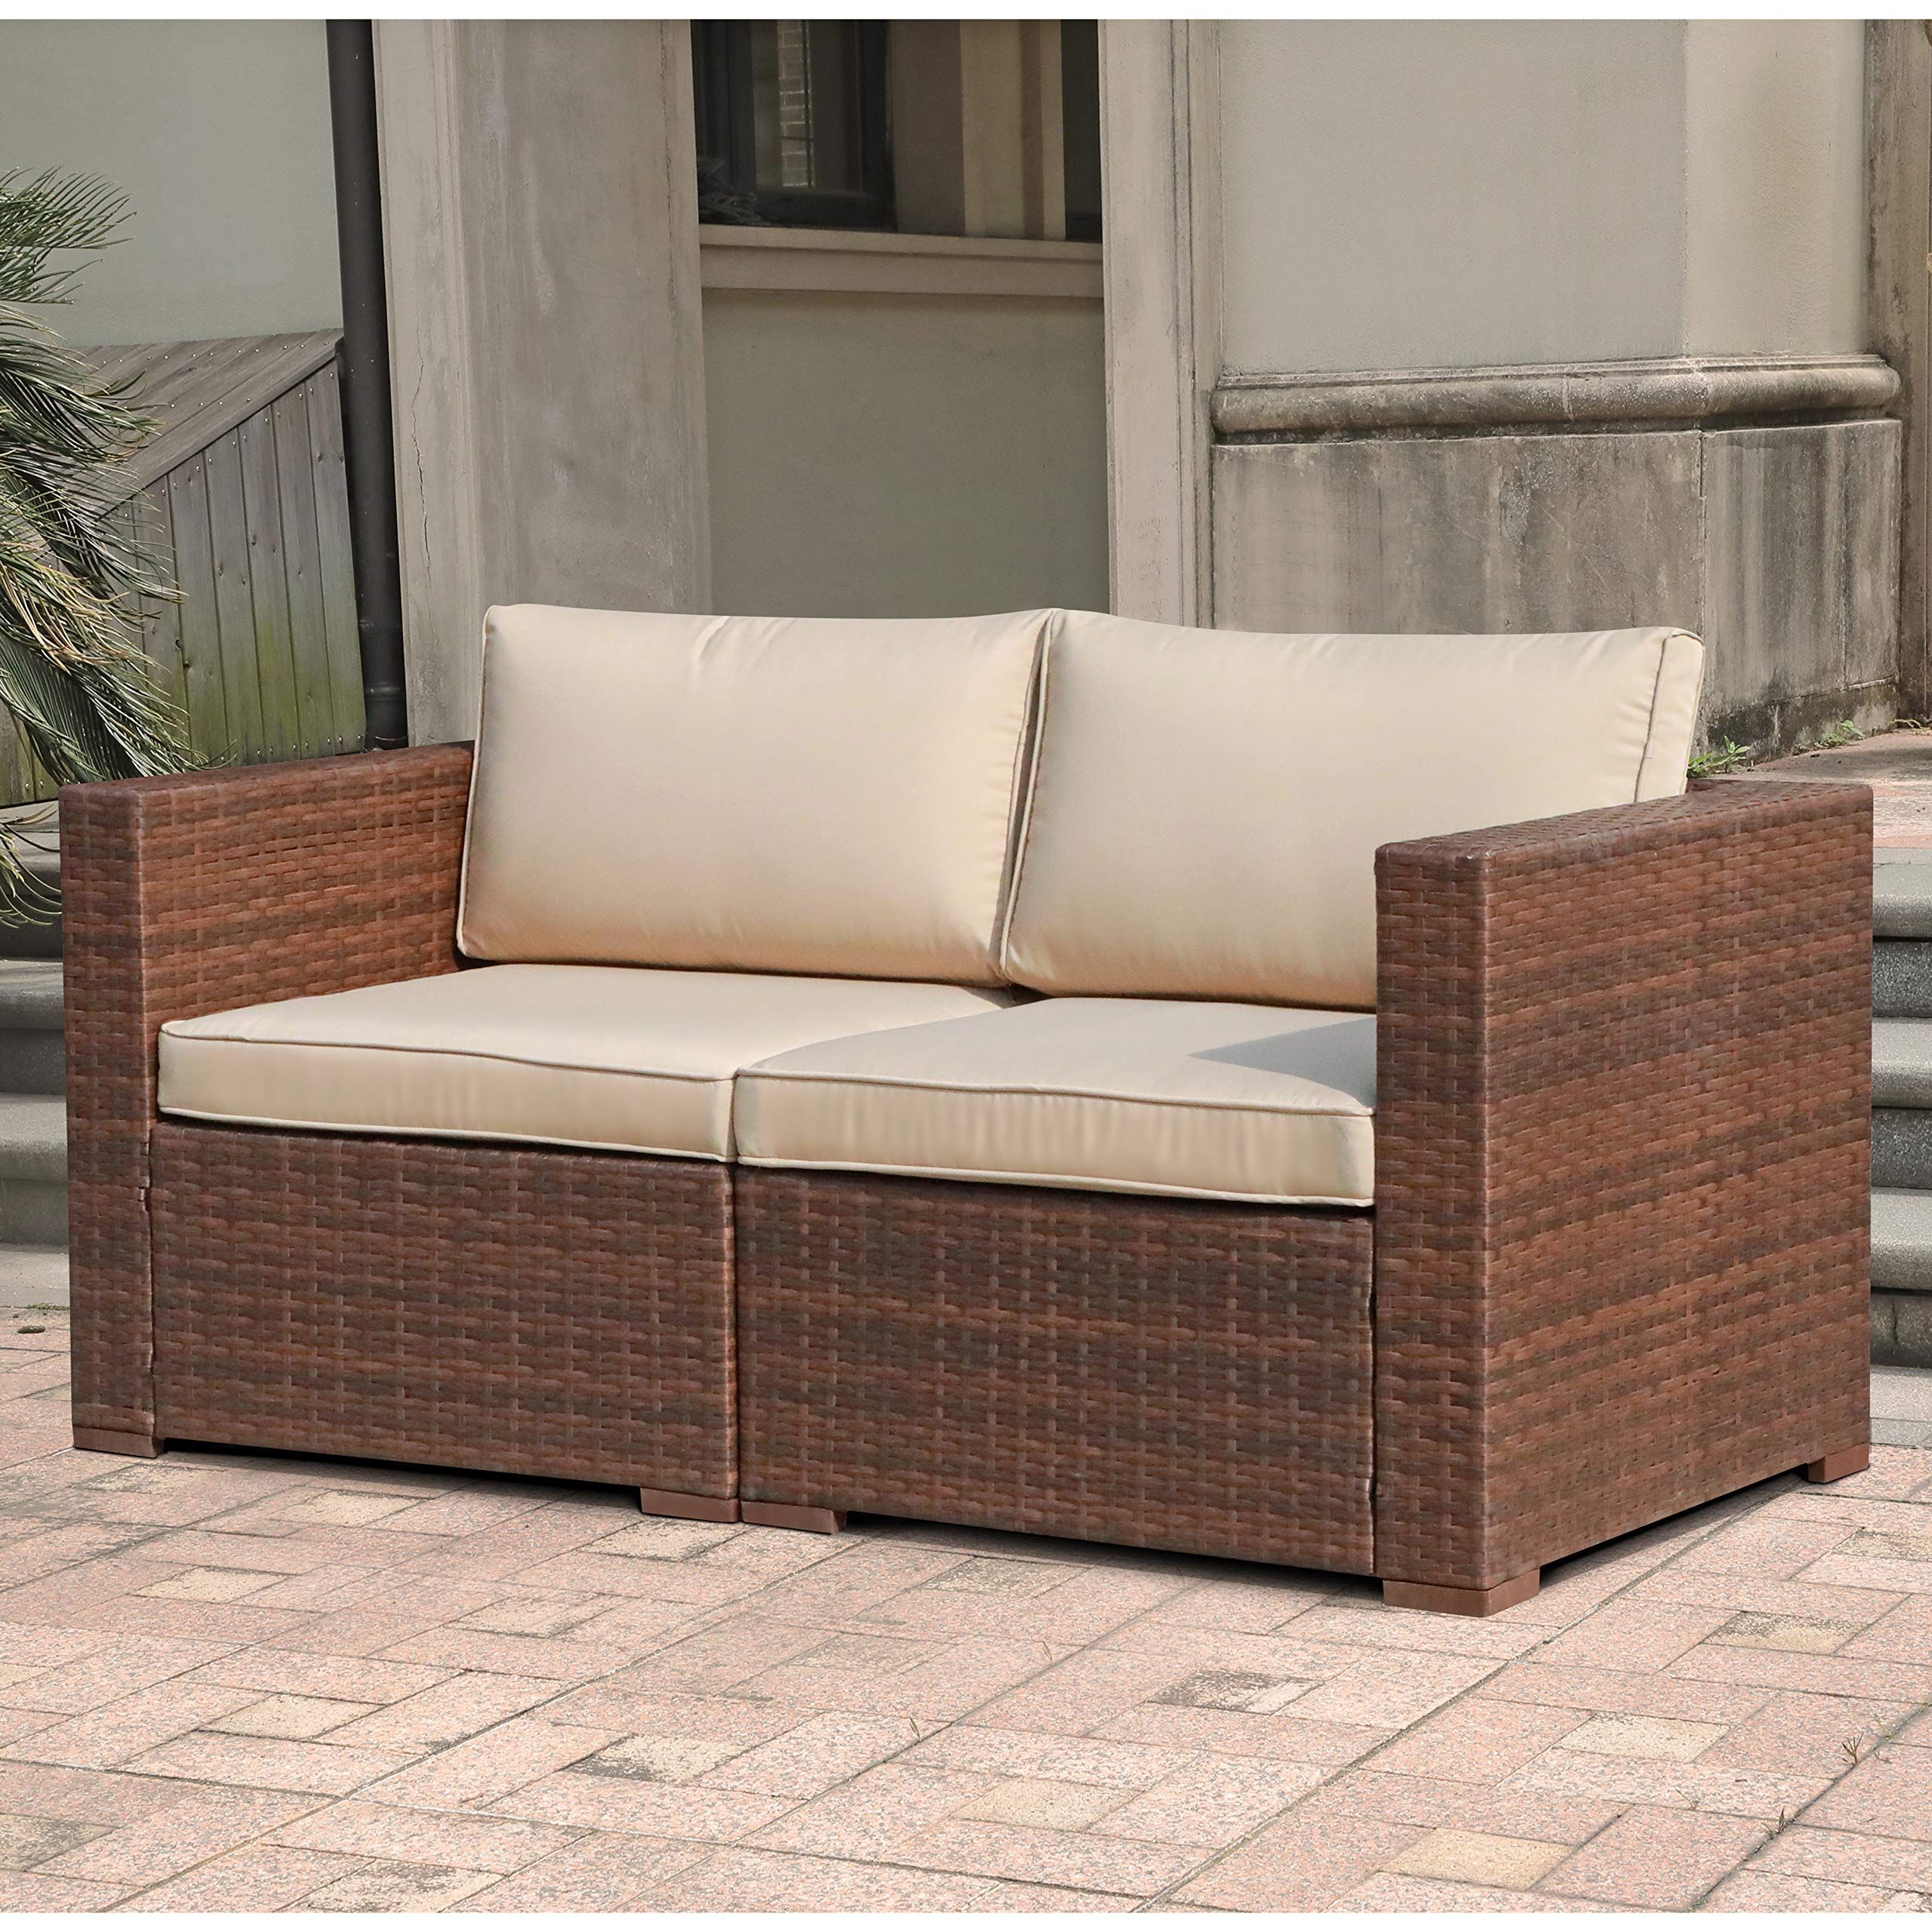 Preferred Loveseat Chairs For Backyard Inside Amazon : Super Patio Loveseat, 2 Piece Outdoor Furniture Set, All  Weather Wicker Loveseat Corner Sofas Thick Beige Cushions, Steel Frame,  Brown : Patio, Lawn & Garden (View 8 of 15)